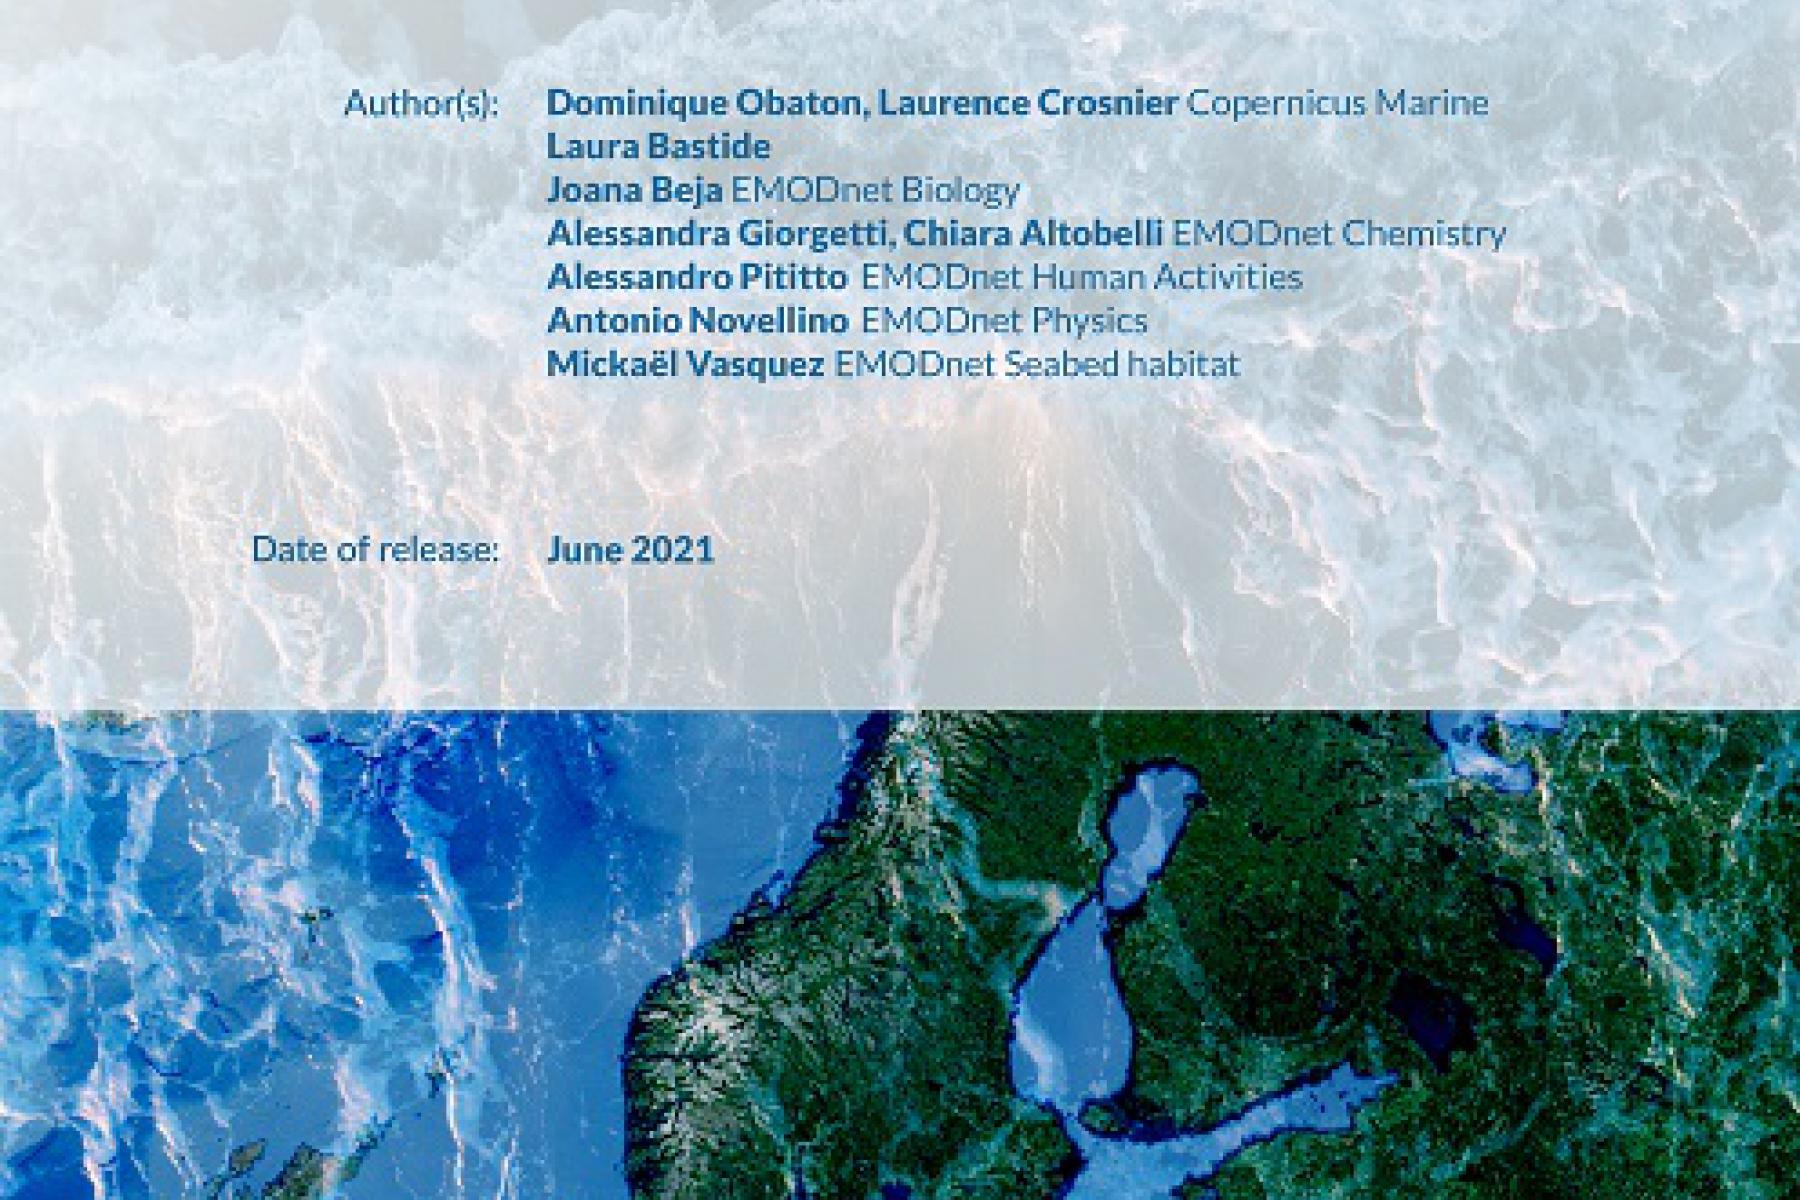 The Joint Copernicus Marine and EMODnet data catalogue for the Marine Strategy Framework Directive (MSFD), has been released in June 2021.